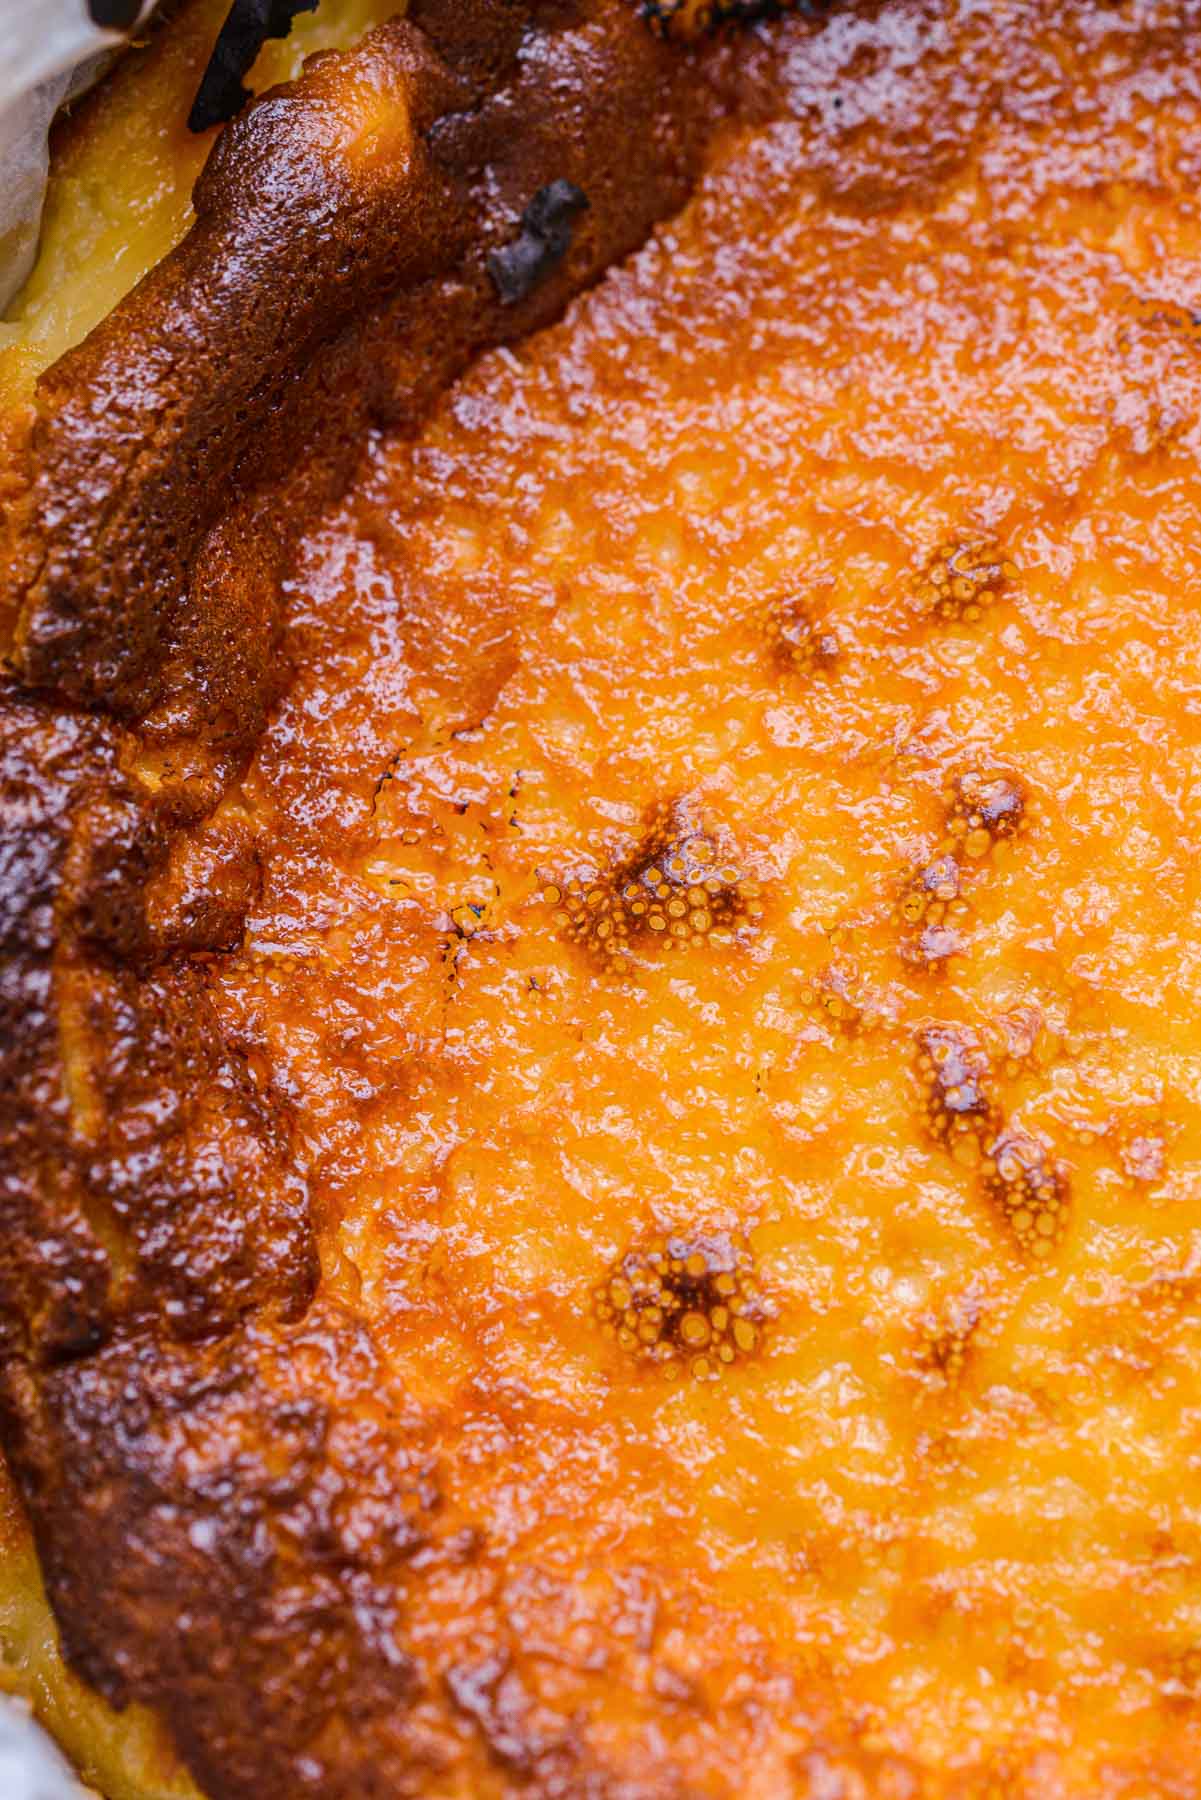 crispy browned top of a cheesecake seen close up.